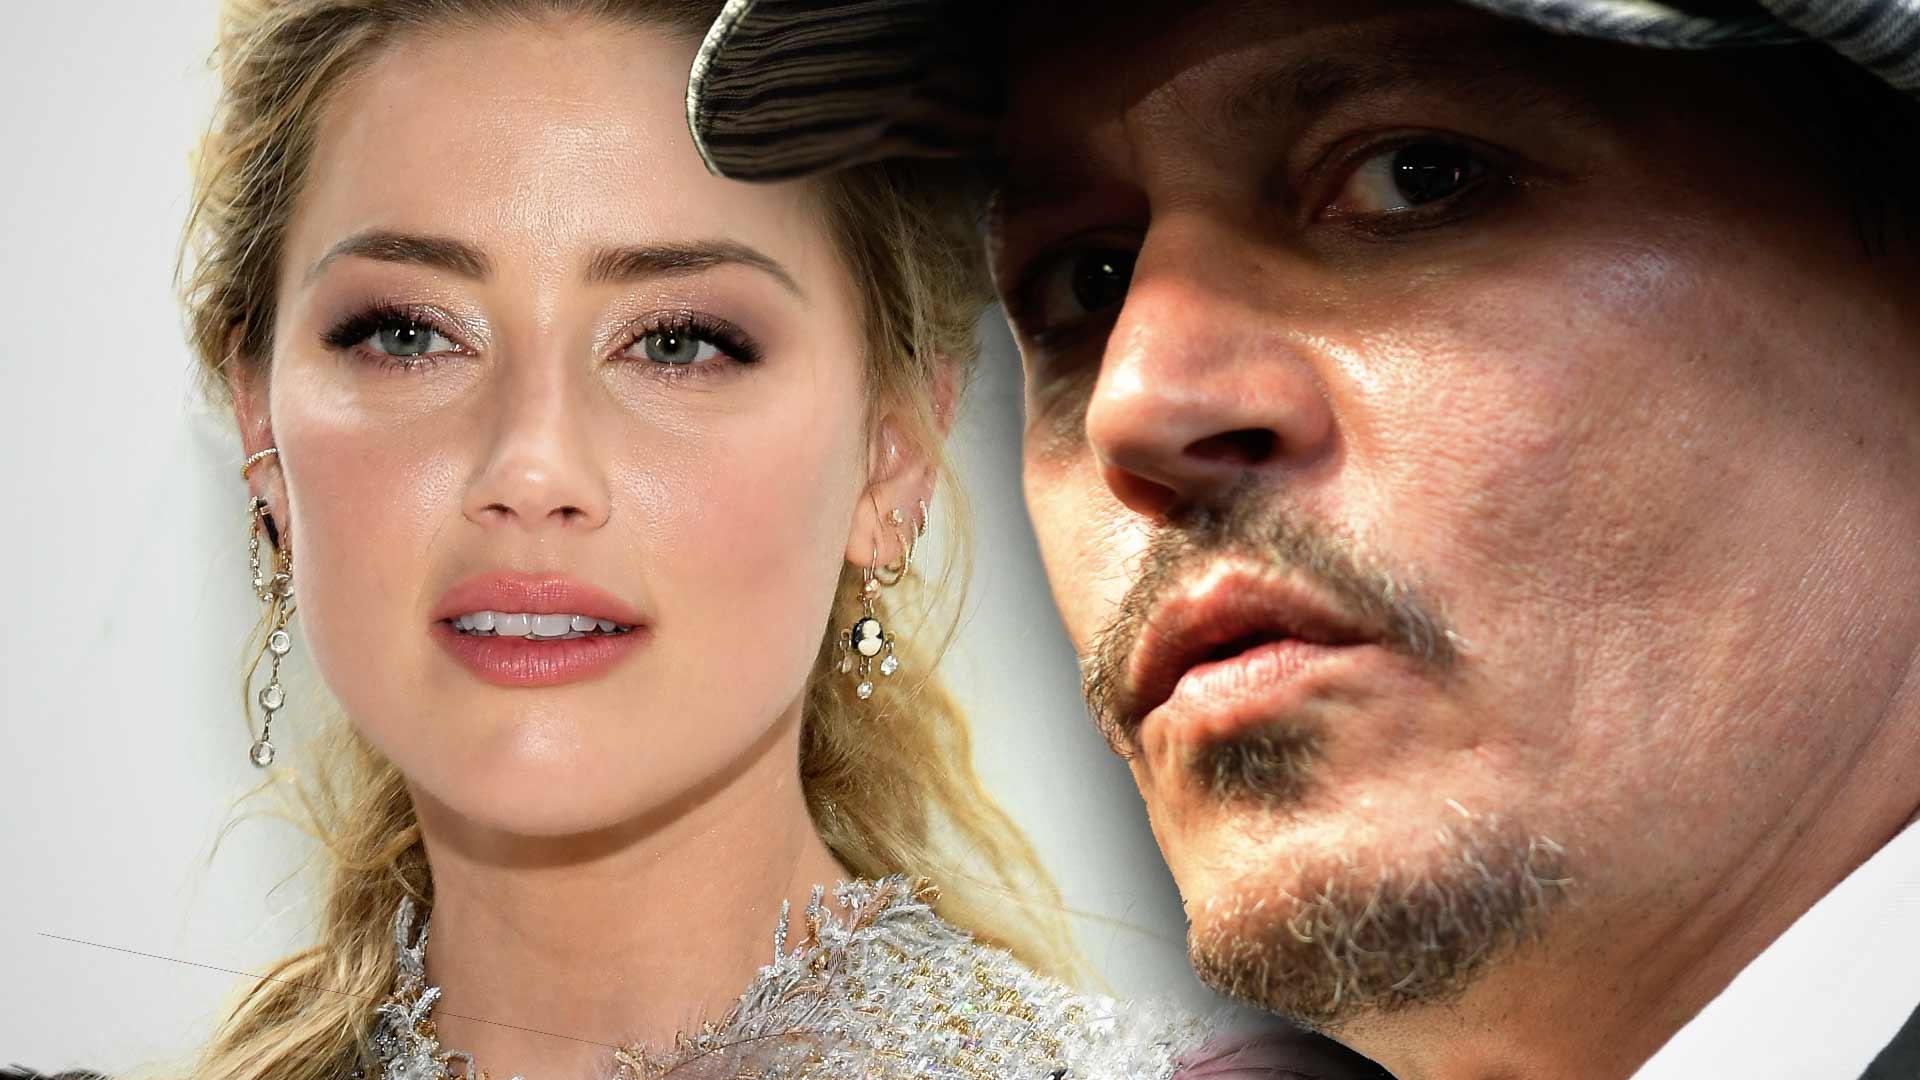 Amber Heard Responds to Johnny Depp’s Defamation Lawsuit With Detailed Abuse Allegations